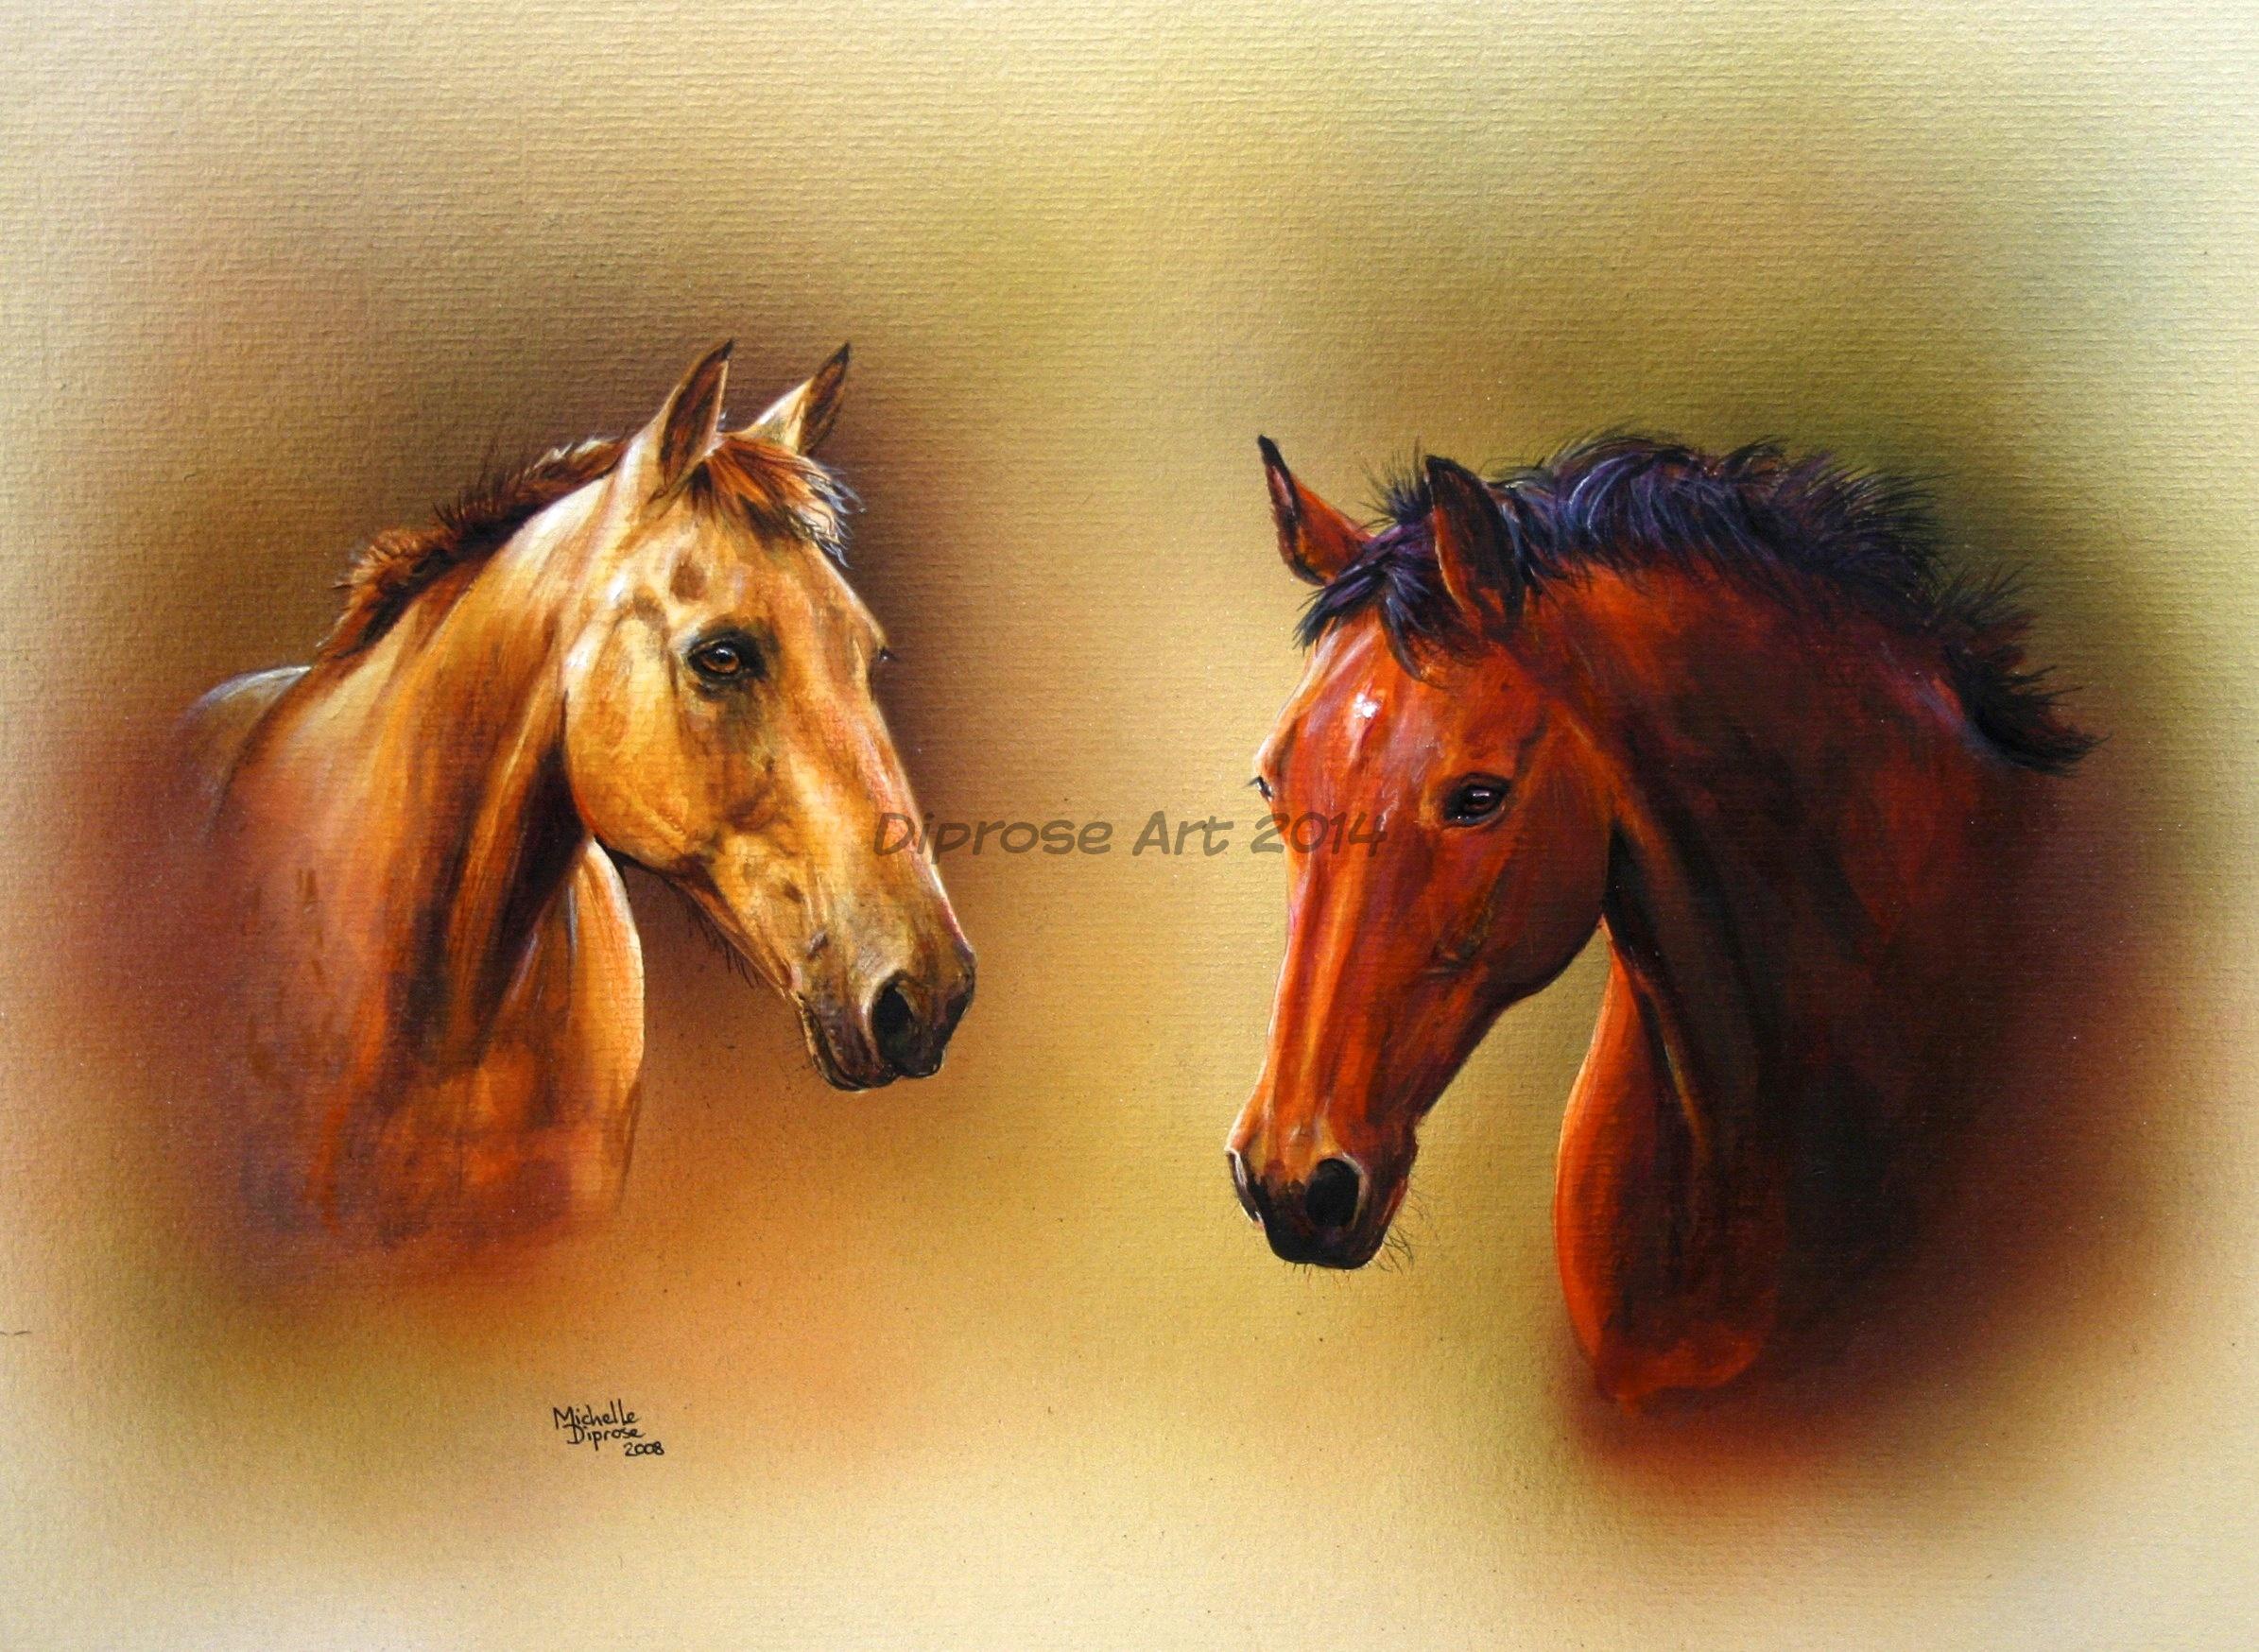 Acrylics on board - approx A3 - horse portraits - Both of my friend Louise&#039;s horses are great characters and dun is a wonderful colour - loved painting these two good lookers.